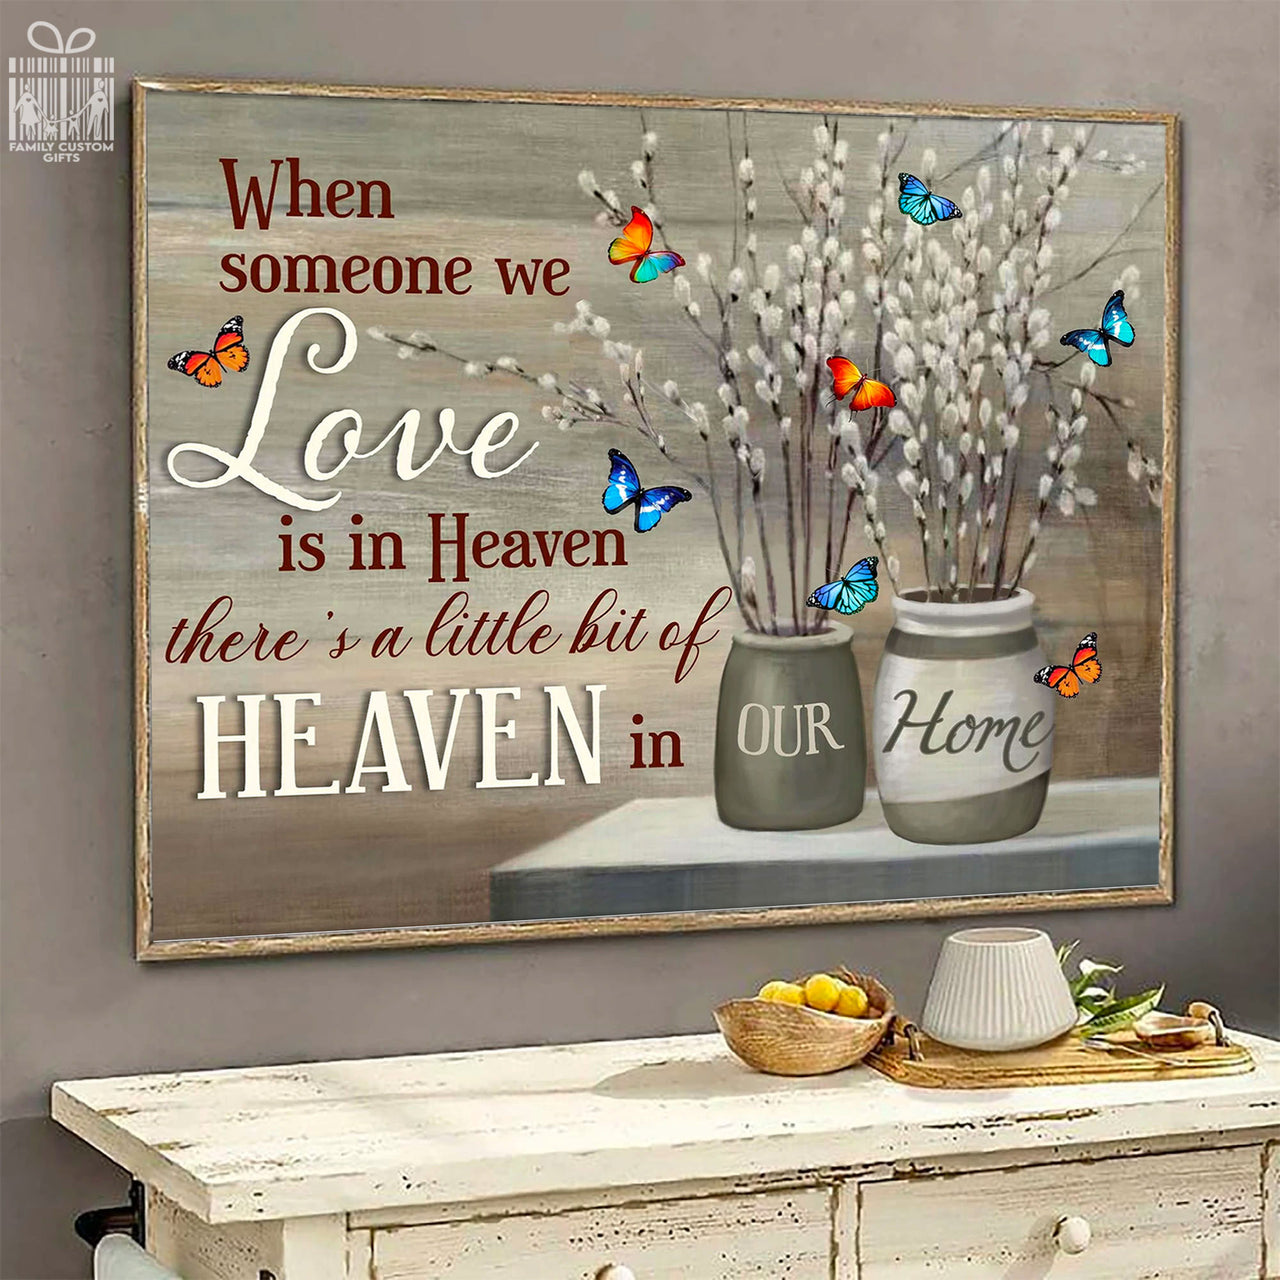 Custom Poster Prints Because Someone We Love is in Heaven Personalized Gifts Wall Decor